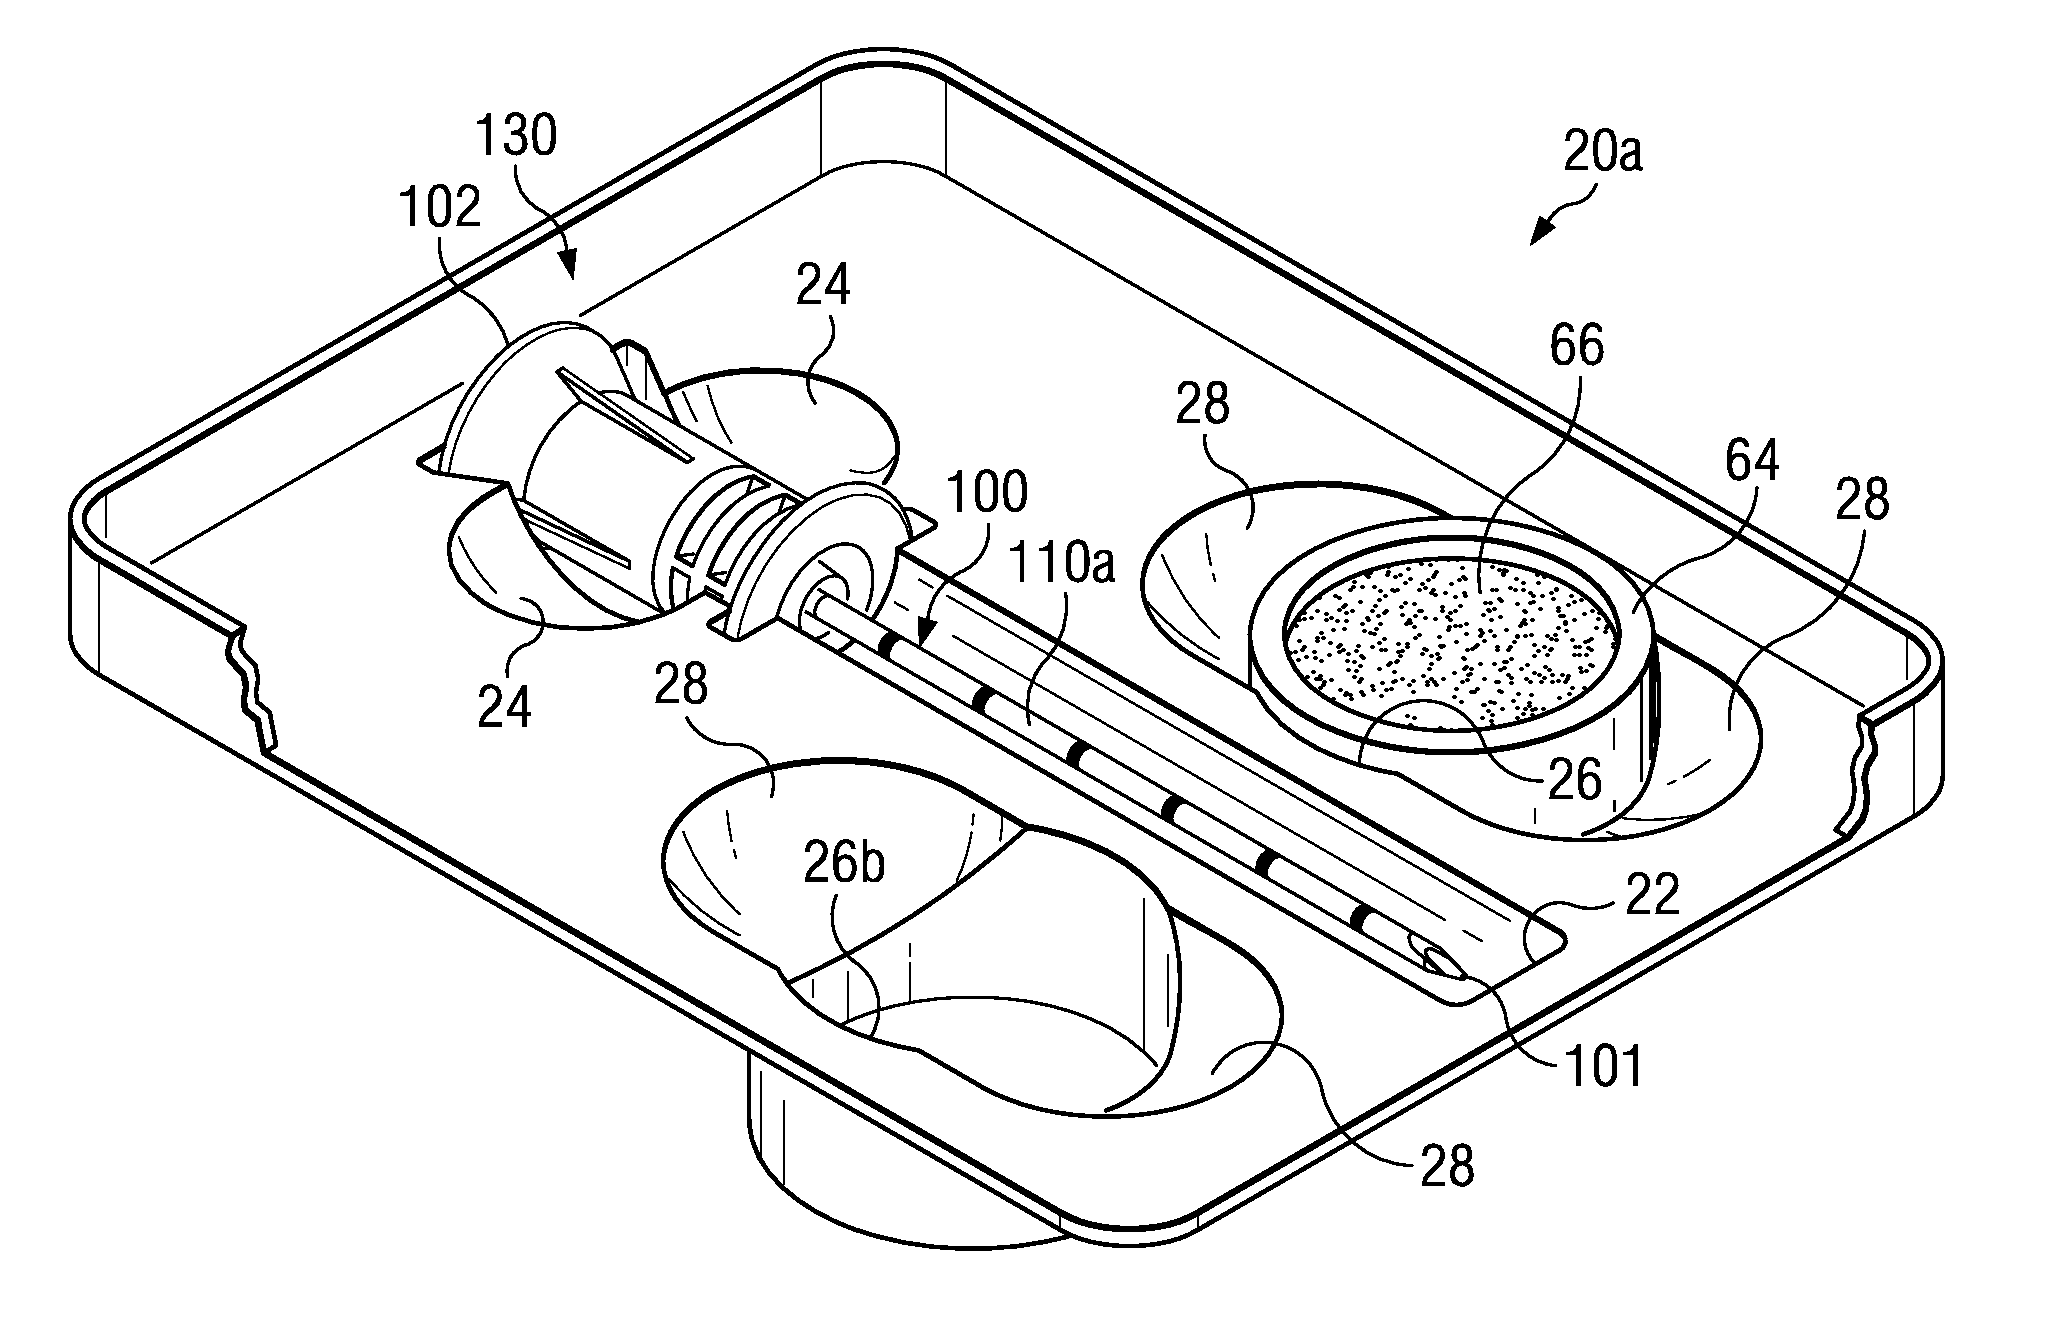 Biopsy Devices and Related Methods